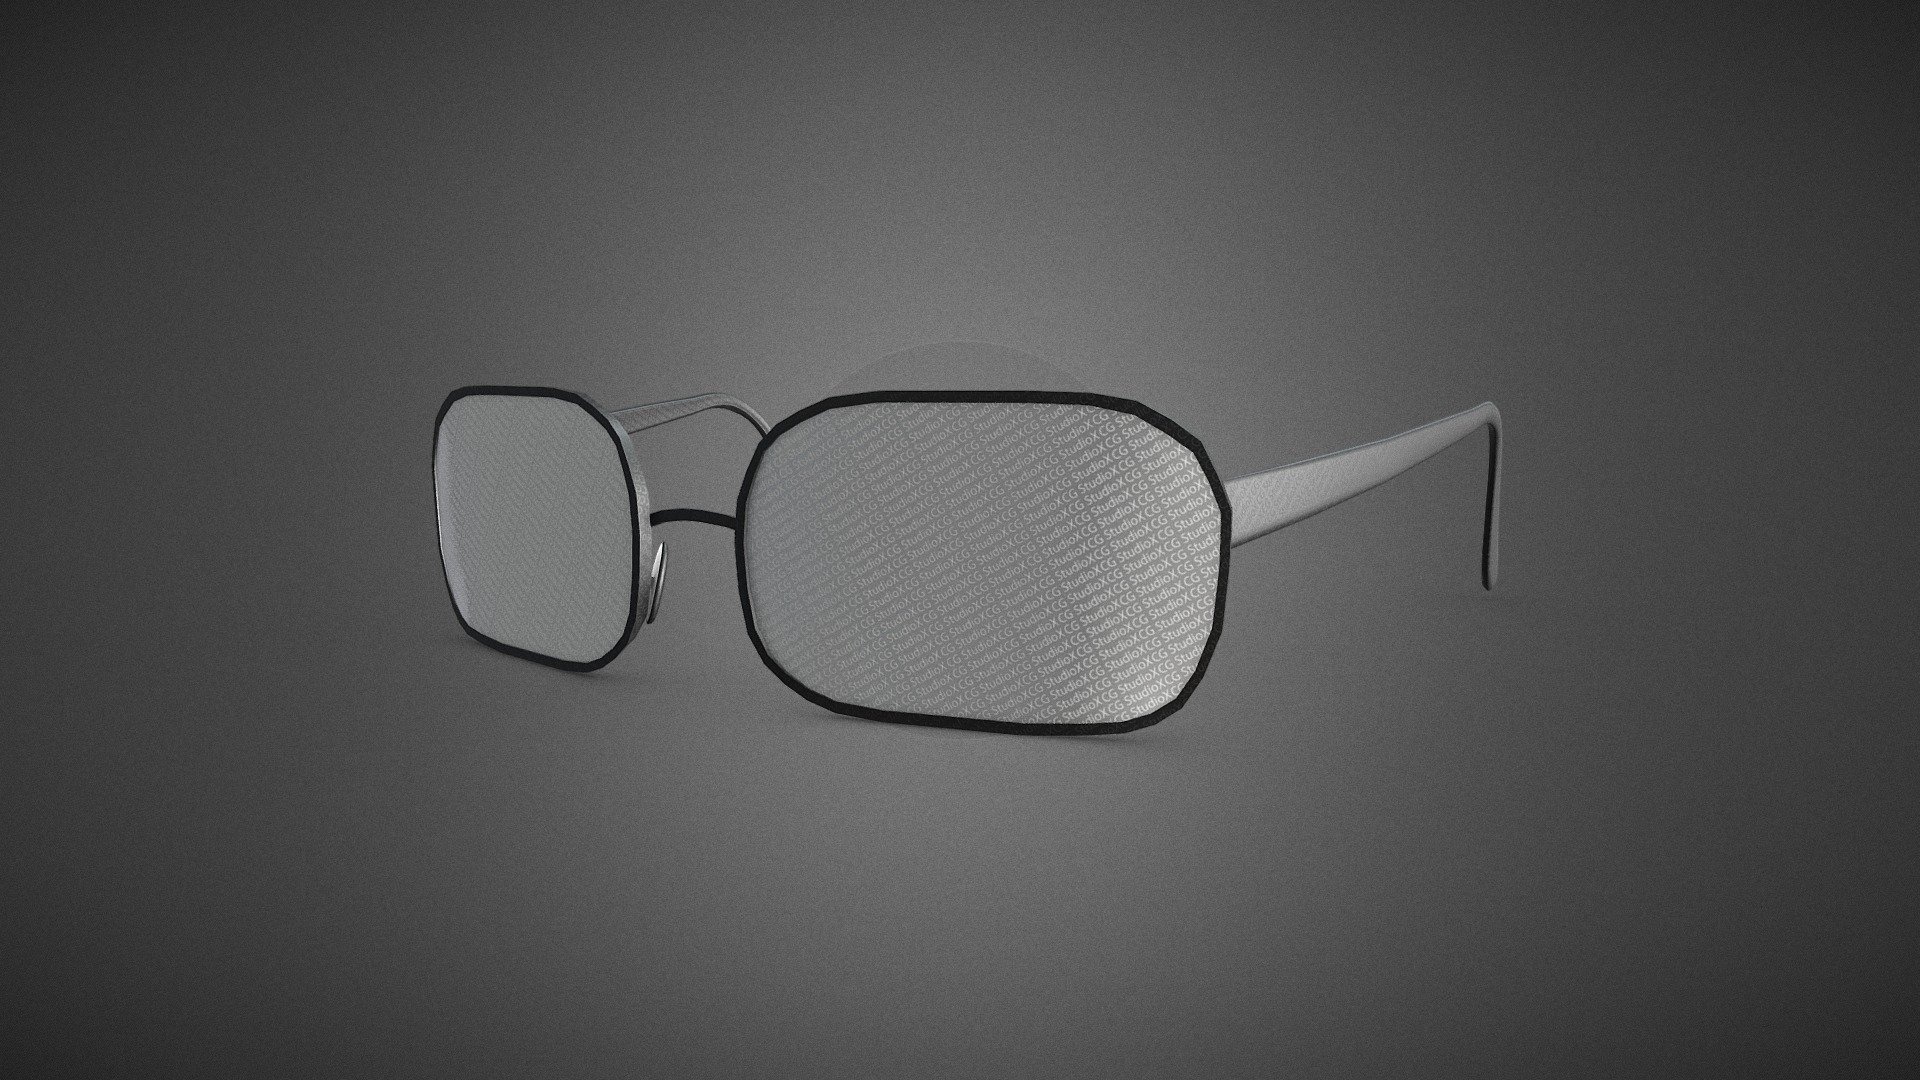 CG StudioX Present :
Stylized Stylized White Glasses Style 2 lowpoly/PBR




This is Stylized White Glasses Style 2  Comes with Specular and Metalness PBR.

The photo been rendered using Marmoset Toolbag 4 (real time game engine )


Features :



Comes with Specular and Metalness PBR 4K texture .

Good topology.

Low polygon geometry.

The Model is prefect for game for both Specular workflow as in Unity and Metalness as in Unreal engine .

The model also rendered using Marmoset Toolbag 4 with both Specular and Metalness PBR and also included in the product with the full texture.

The texture can be easily adjustable .


Texture :



One set of UV [Albedo -Normal-Metalness -Roughness-Gloss-Specular-Ao] (4096*4096)

The Alpha map is included within the Albedo map, it's on the Alpha channel.


Files :
Marmoset Toolbag 4 ,Maya,,FBX,glTF,Blender,OBj with all the textures.




Contact me for if you have any questions.
 - Stylized White Glasses Style 2 - Buy Royalty Free 3D model by CG StudioX (@CG_StudioX) 3d model